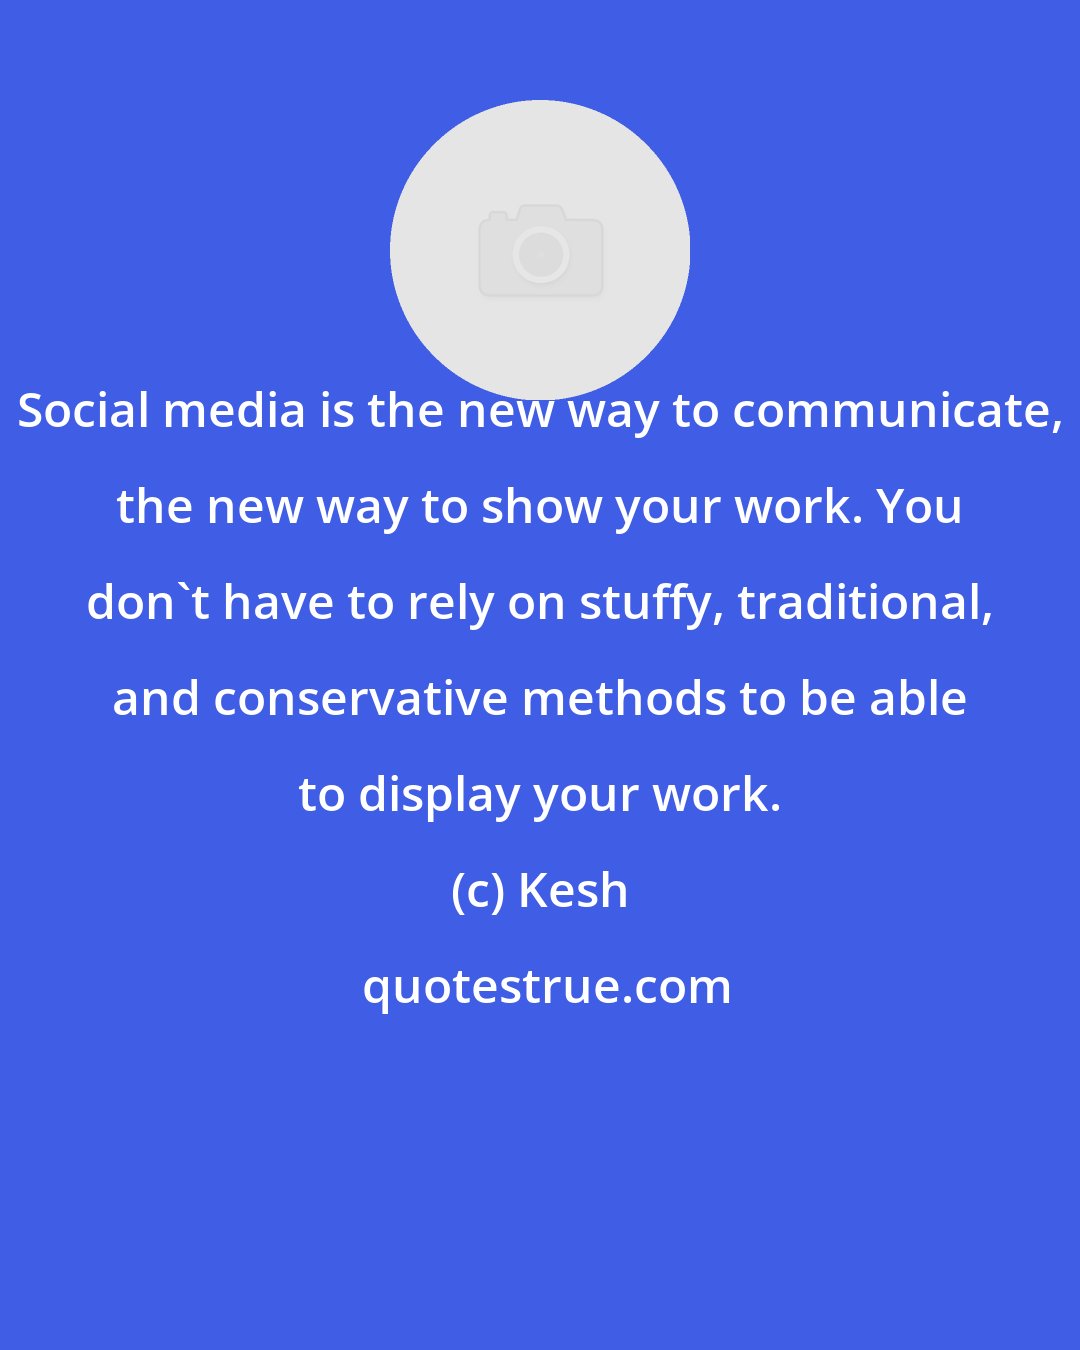 Kesh: Social media is the new way to communicate, the new way to show your work. You don't have to rely on stuffy, traditional, and conservative methods to be able to display your work.